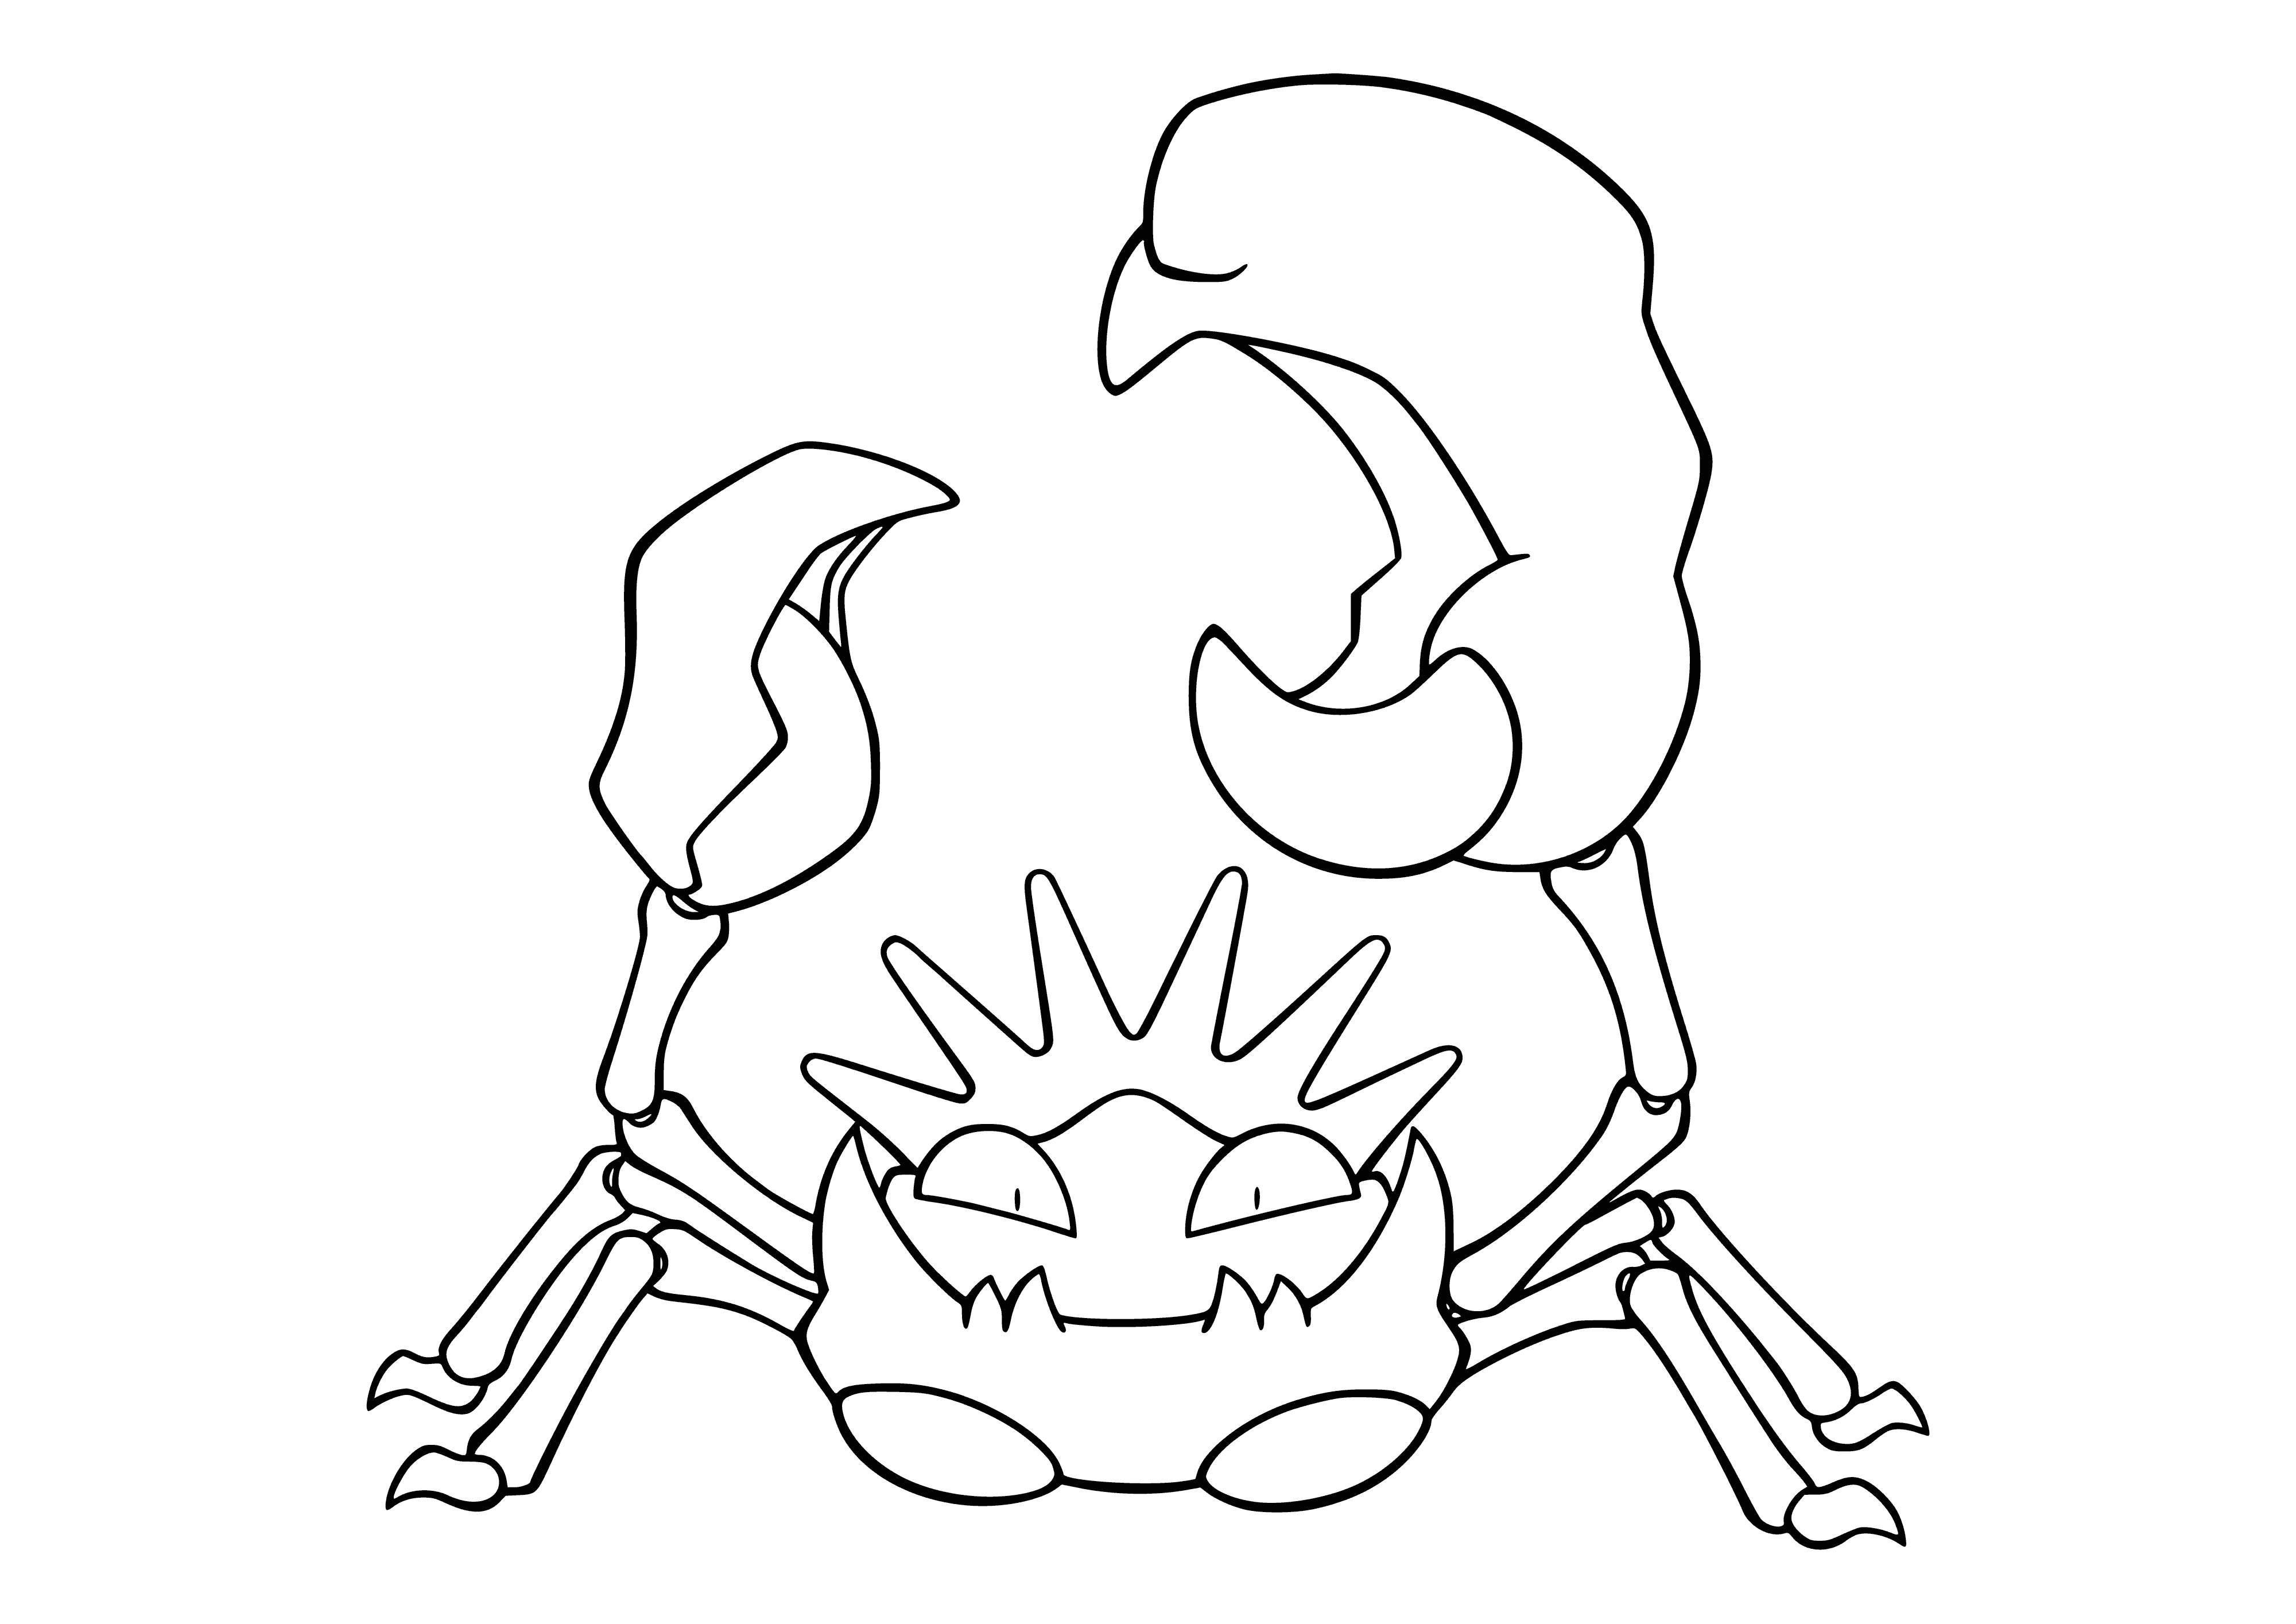 coloring page: Kingler is a lobster-like Pokémon w/ an orange carapace & powerful claws. It's got a large head w/ small eyes & a large mouth; its lower body is white w/orange stripes. Its claws are powerful, able to crush anything.